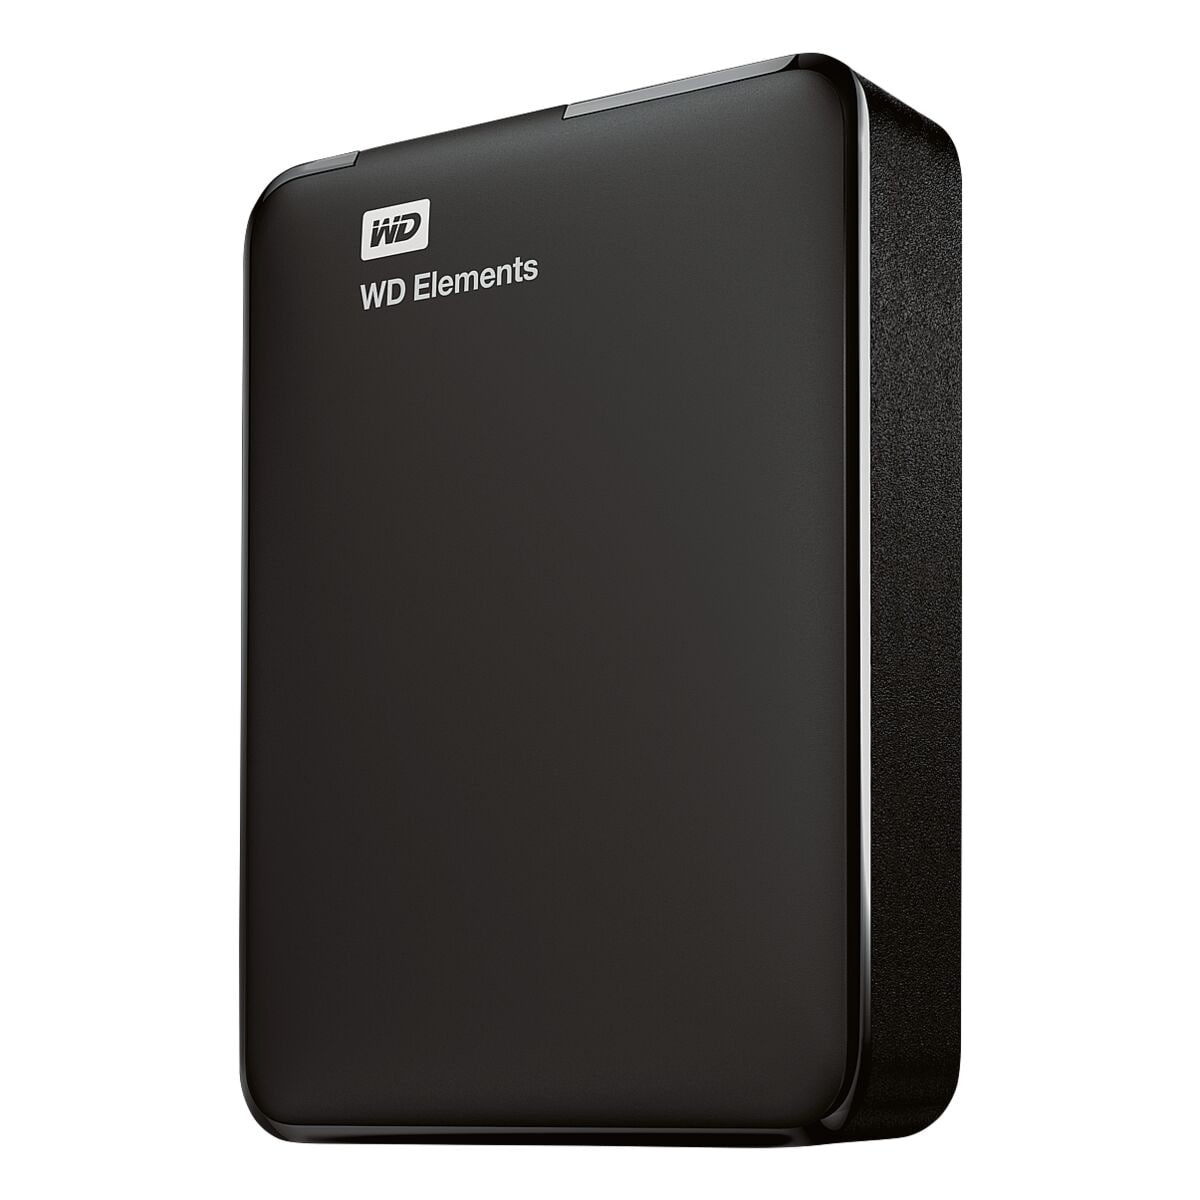 WD Elements 2 TB, externe HDD-harde schijf, USB 3.0, 6,35 cm (2,5 inch)